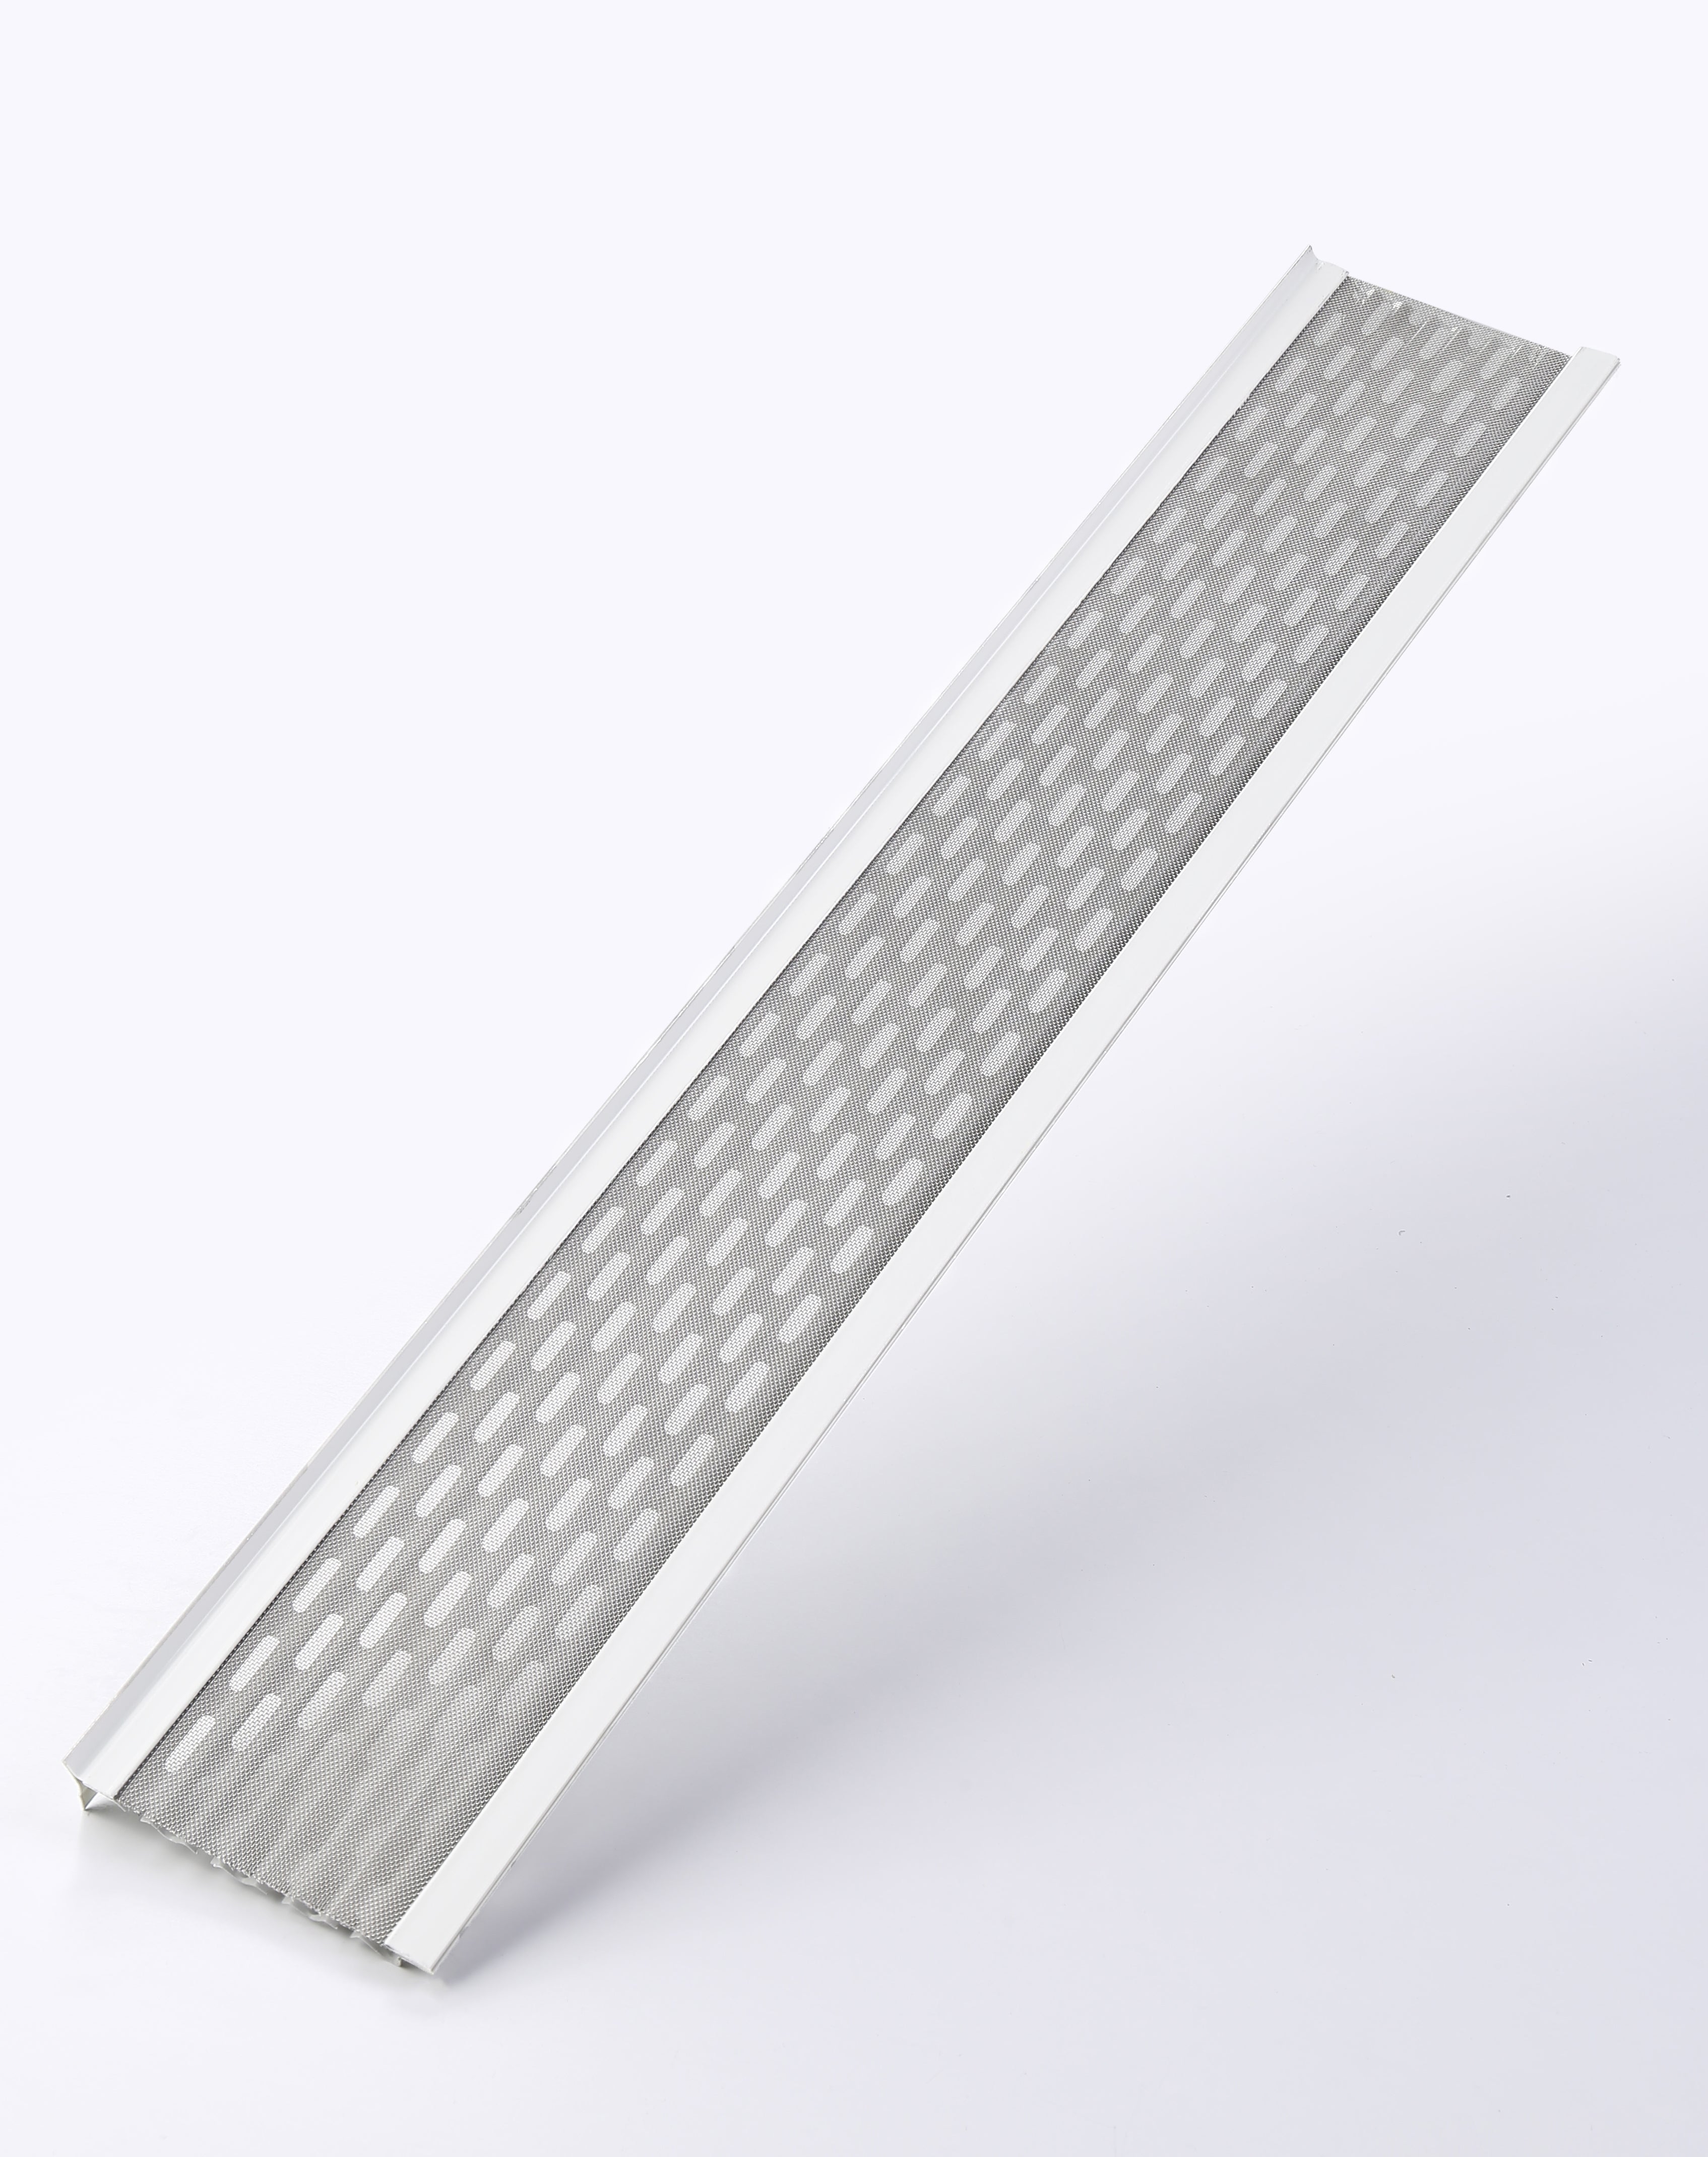 5"white gutter,cover gutter/guards/gutter/protecton/gutter/guardLeaf Protection, Stainless Steel Mesh, WHITE Aluminum Gutter Covers, Contractor Grade, Gutter Guard from Manufacturer Made in The USA Stainless steel micro-mesh blocks leaves, pine needles and roof grit from entering your gutter. Heavy (Industrial) Gauge .019 100% Aluminum will not rust - Lifetime-Warranty LEAF4GO DIY …/